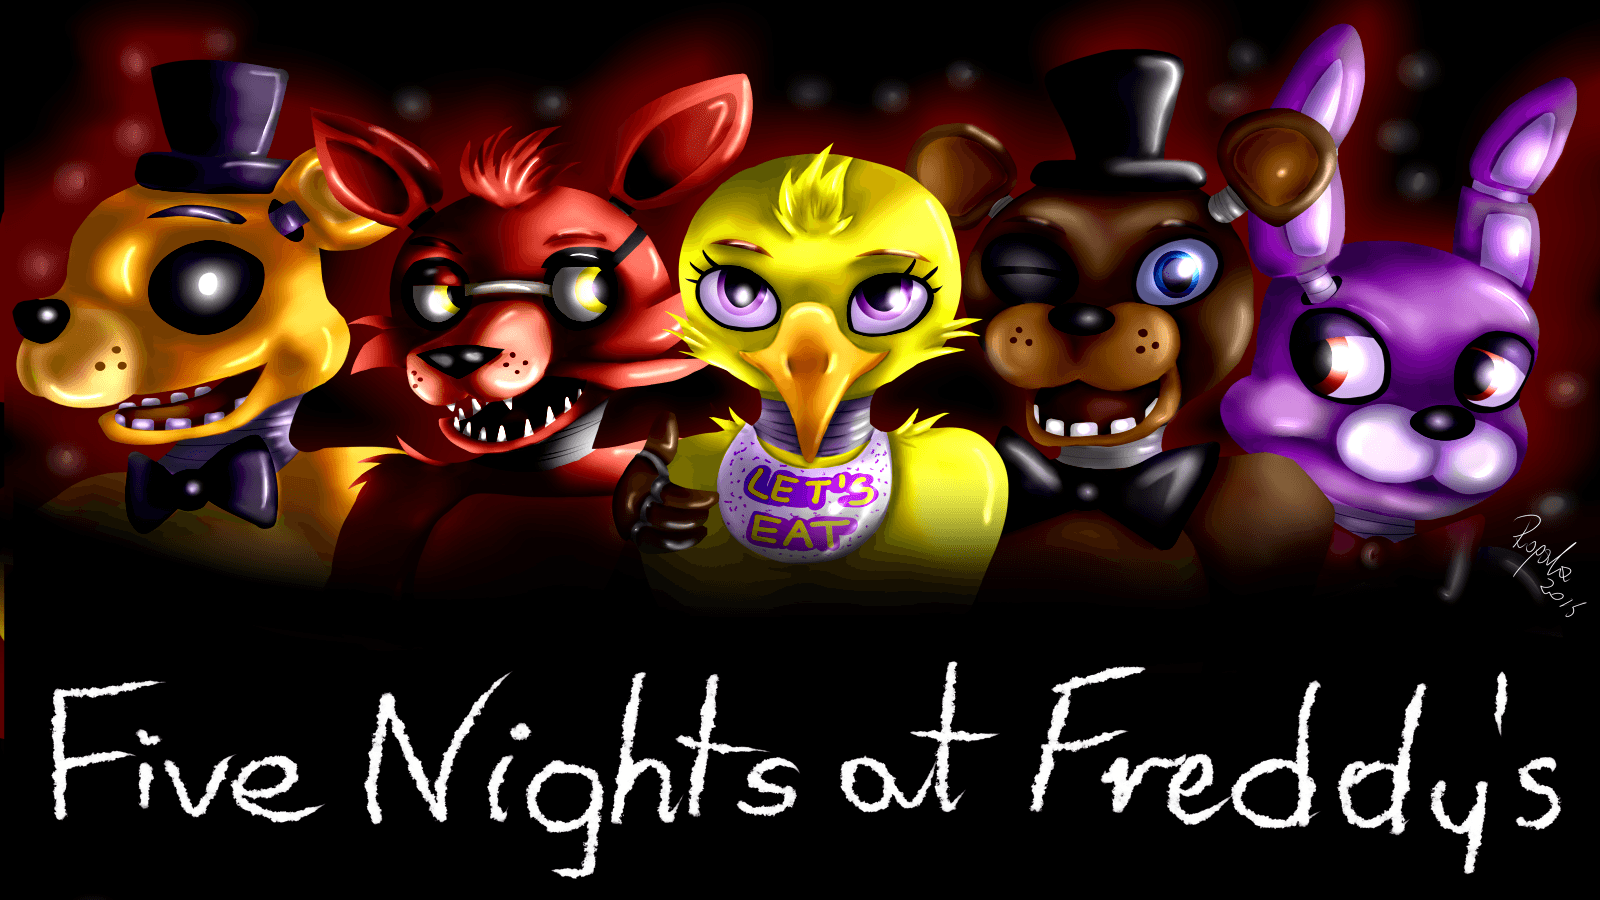 Five Nights at Freddy&Wallpapers by DarkFireOmega